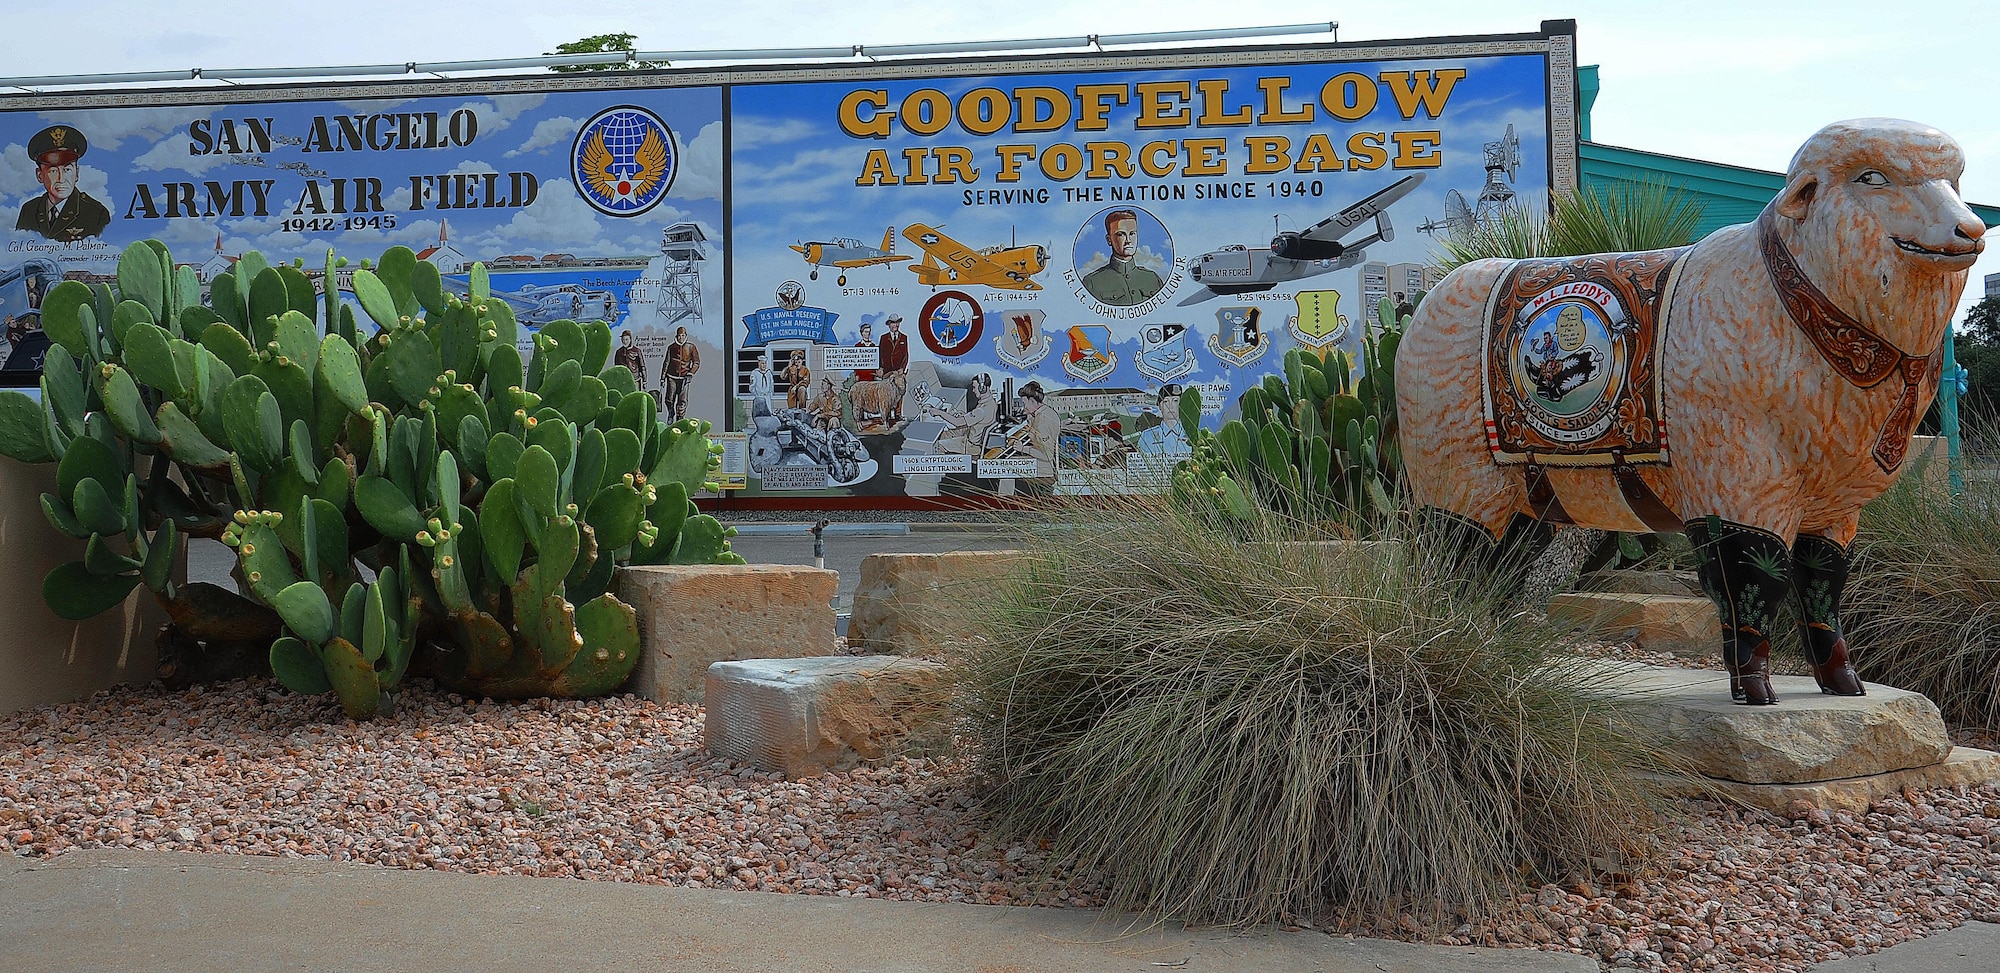 The Military Mural, located in downtown San Angelo, depicts the heritage of Goodfellow Air Force Base, Texas, Sept. 9, 2015. The mural depicts the beginnings of the Air Force in San Angelo with the San Angelo Army Air Field with historical aircraft and buildings, like the AT-11 Bomb Trainer and the Sante Fe Orient Depot with crowds of GI’s waiting for the train to San Angelo.  (U.S. Air Force photo by Airman Caelynn Ferguson/Released)